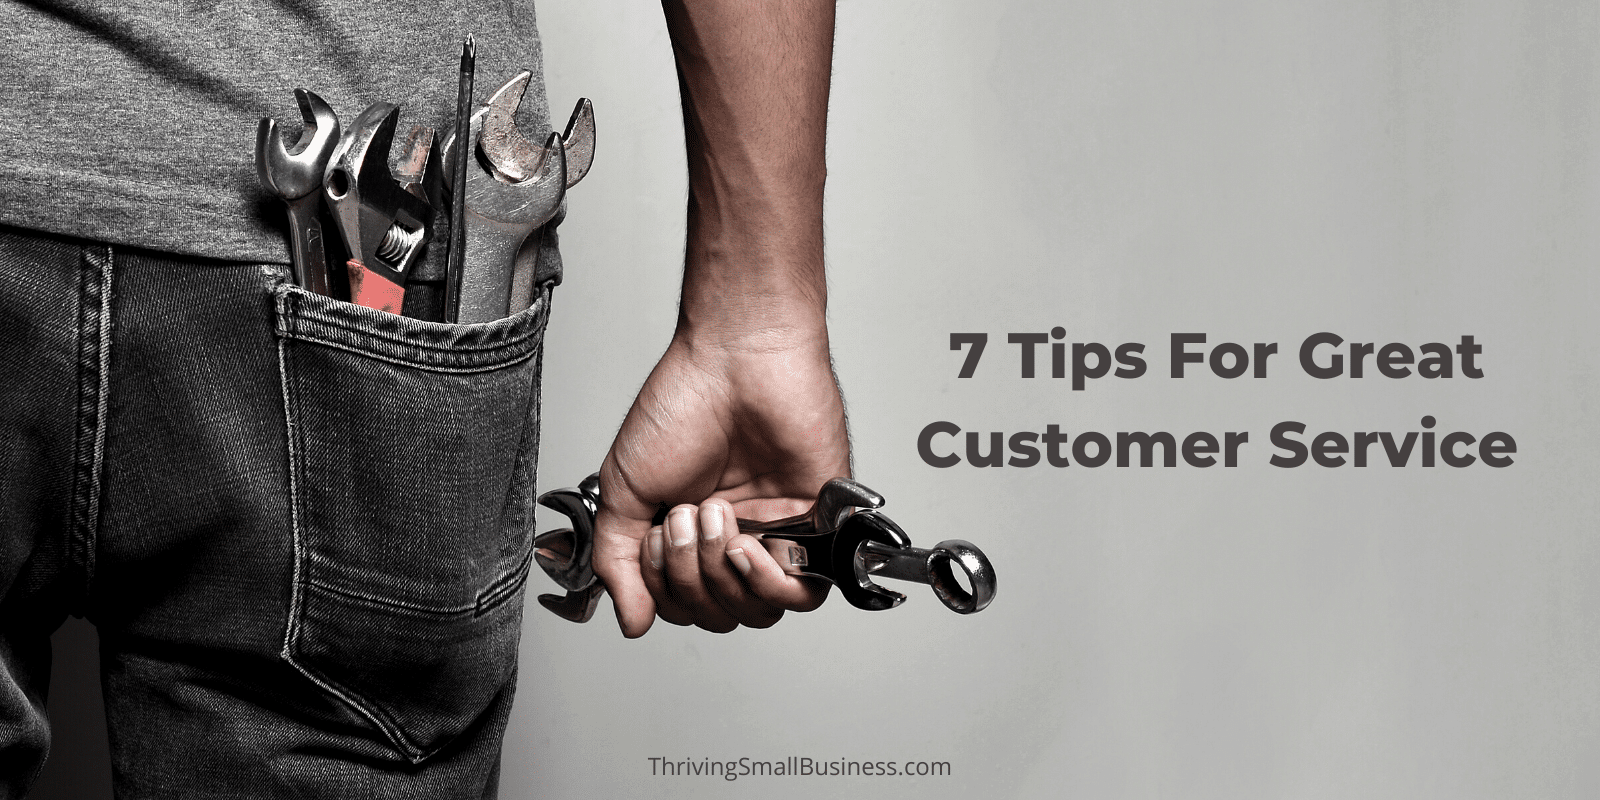 tips for great customer service